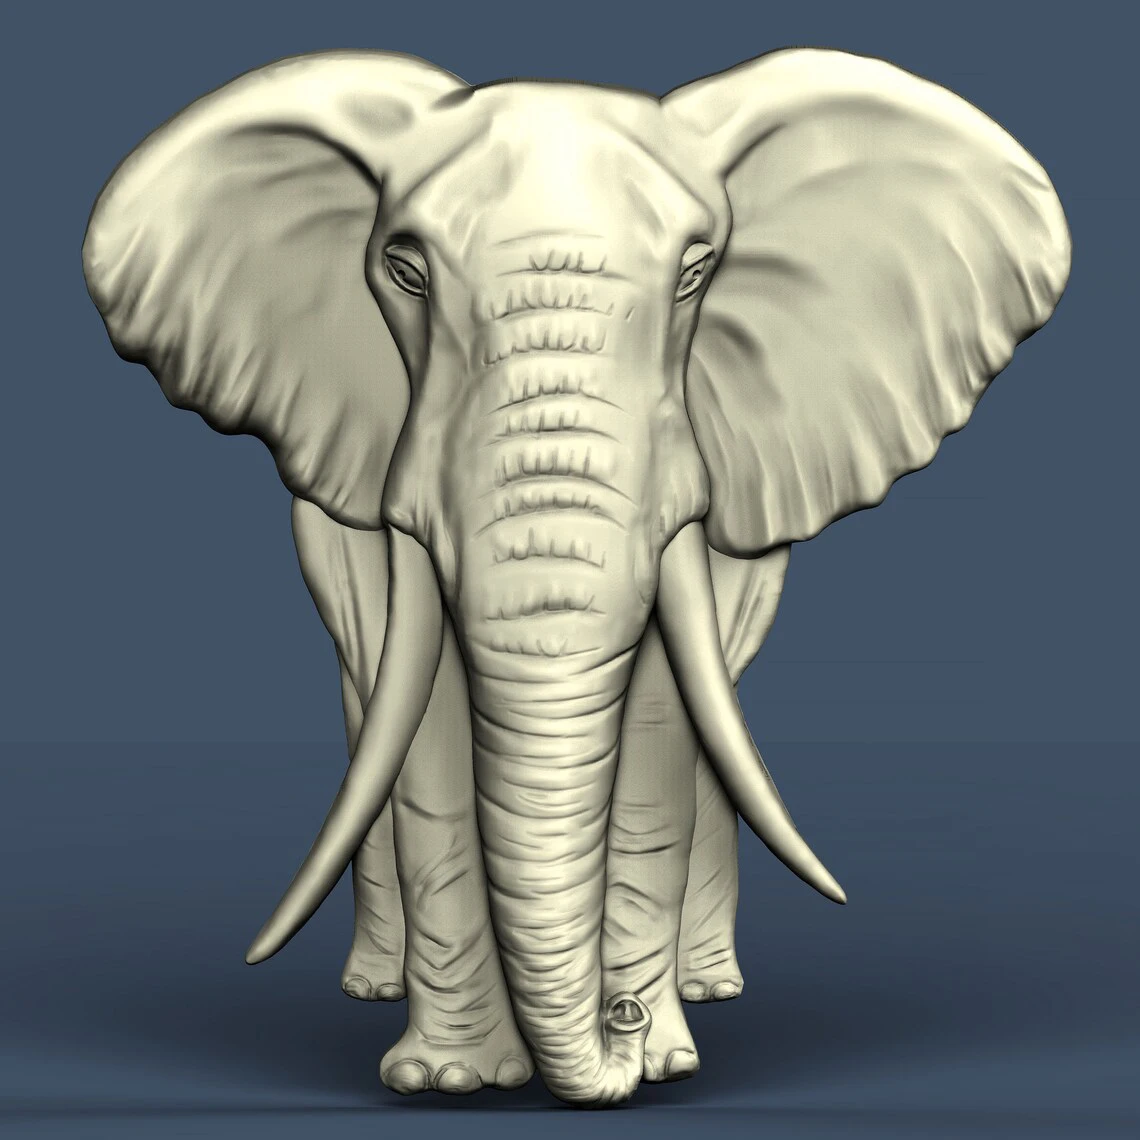 Elephant Animal 3D STL Model for CNC Router Engraving & 3D Printing Relief Support ZBrush Artcam Aspire Cut3D woodtech multi boring machine